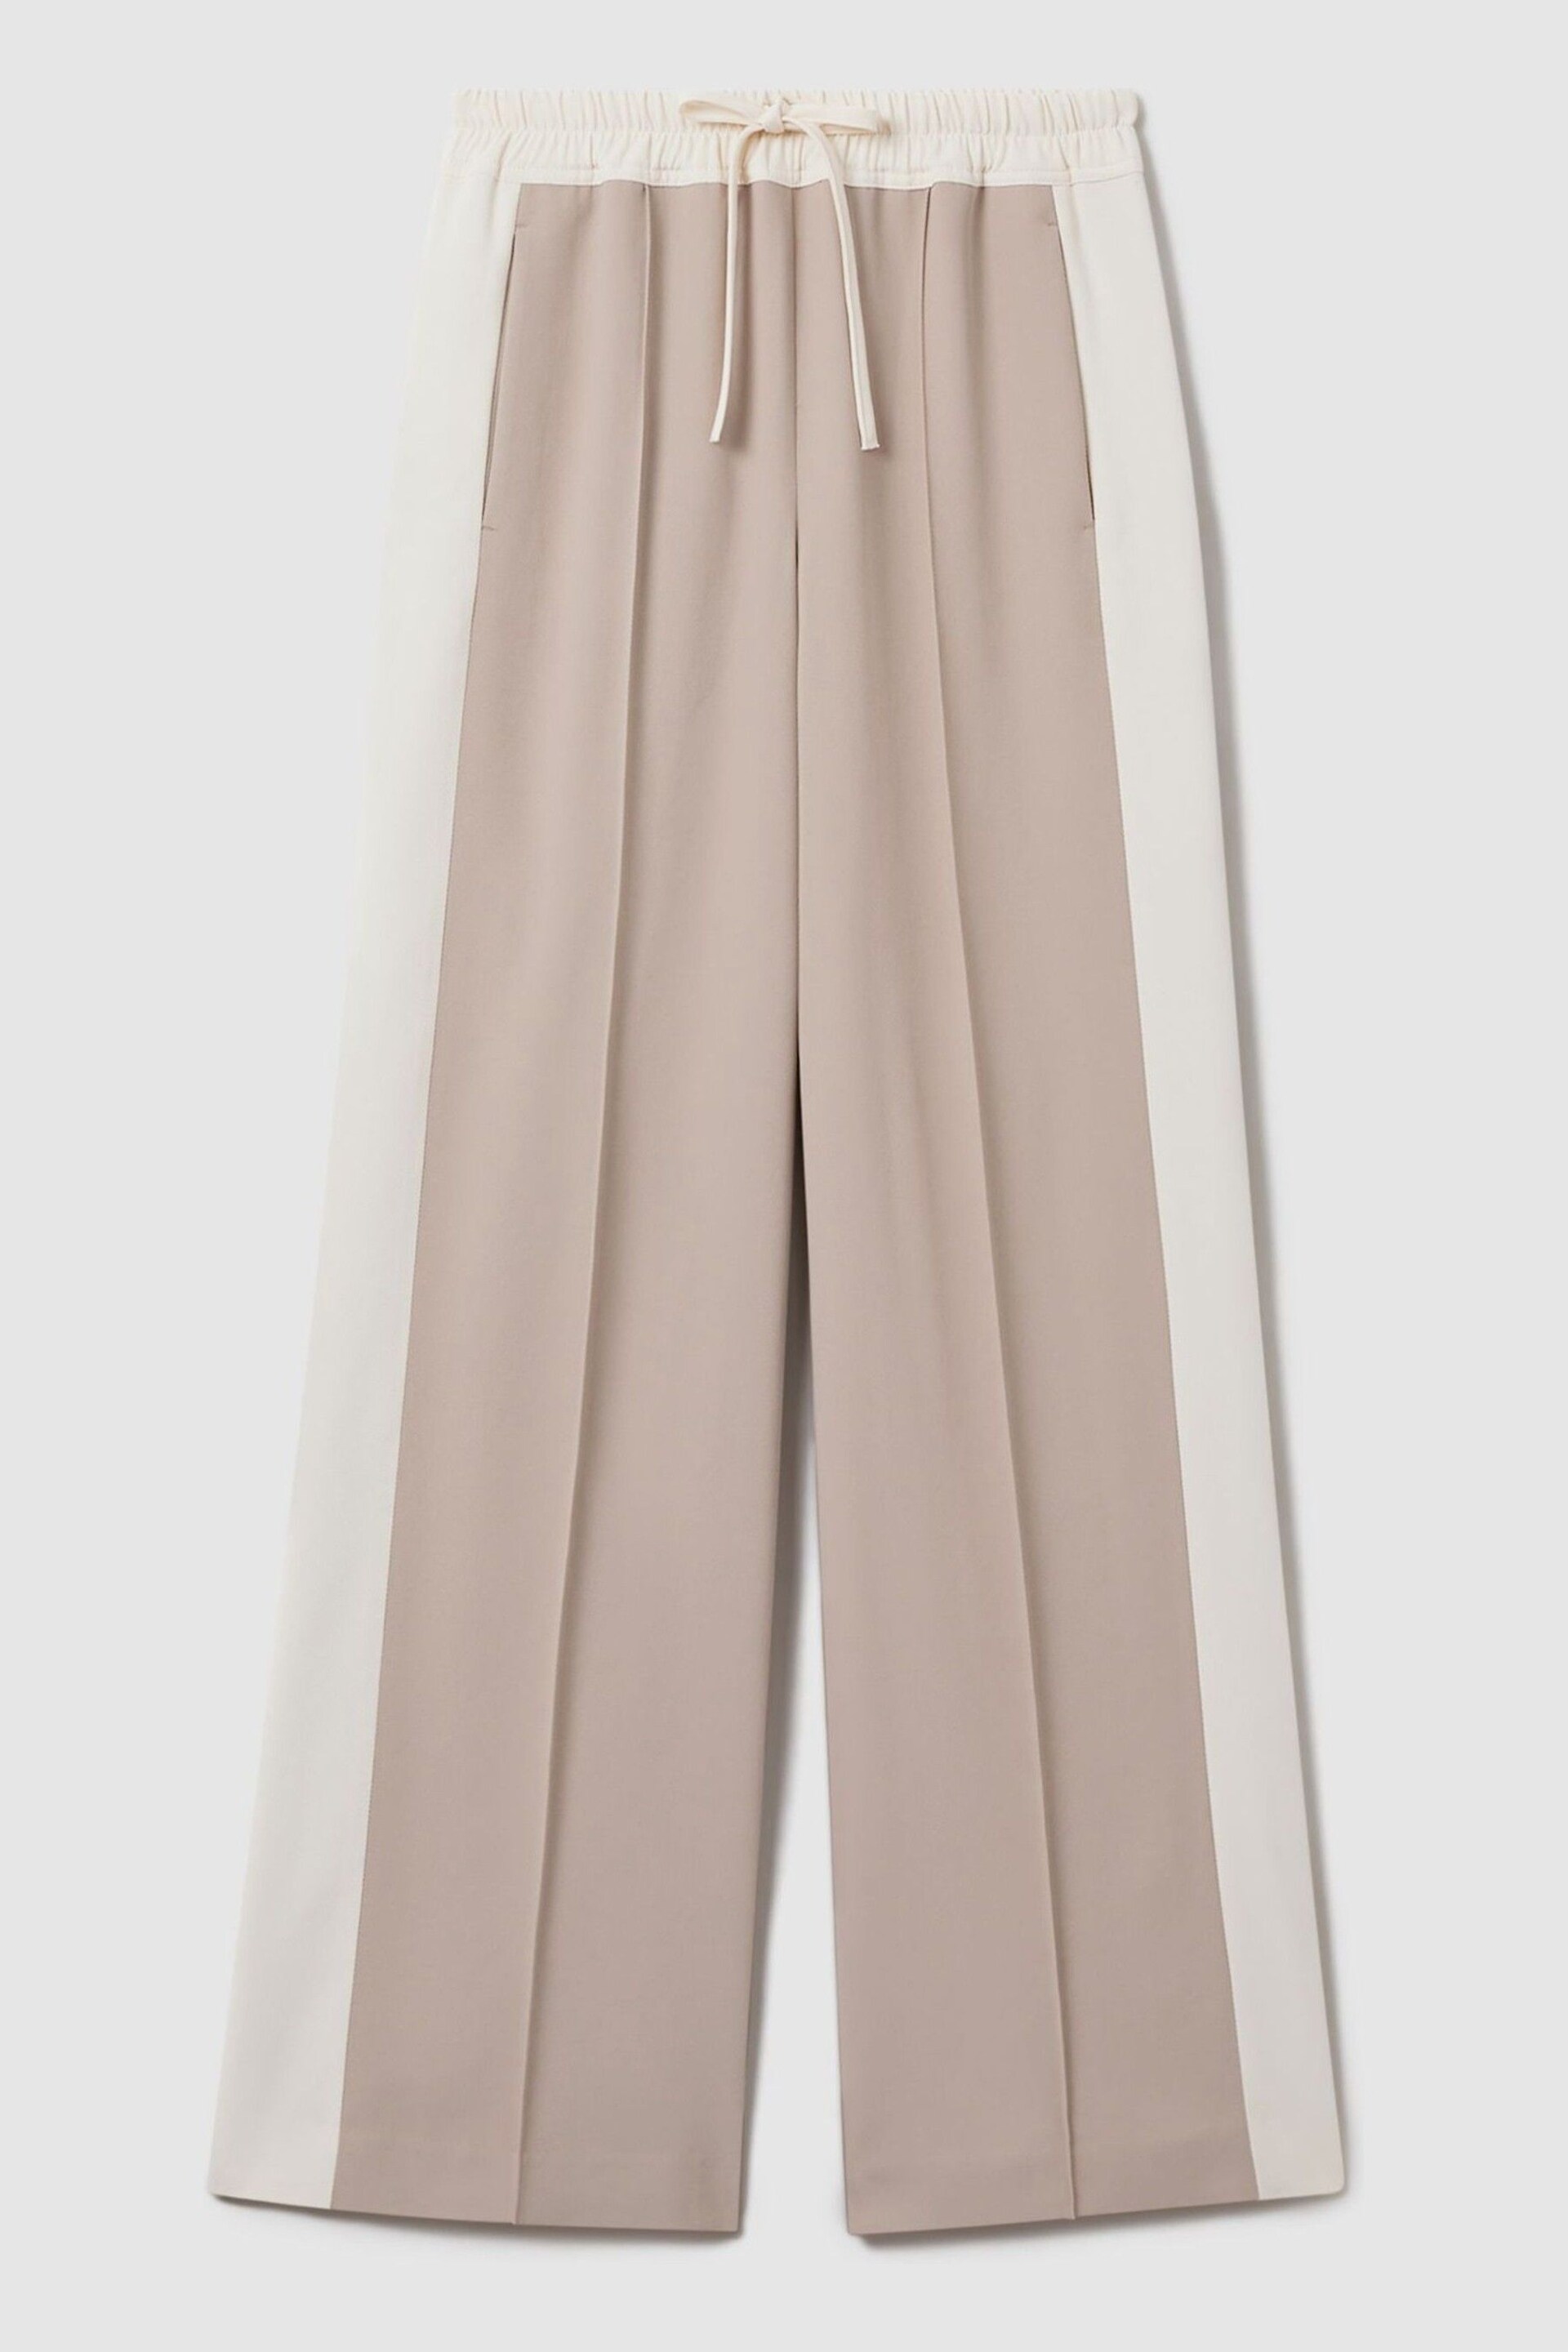 Reiss Natural May Wide Petite Wide Leg Contrast Stripe Drawstring Trousers - Image 2 of 7